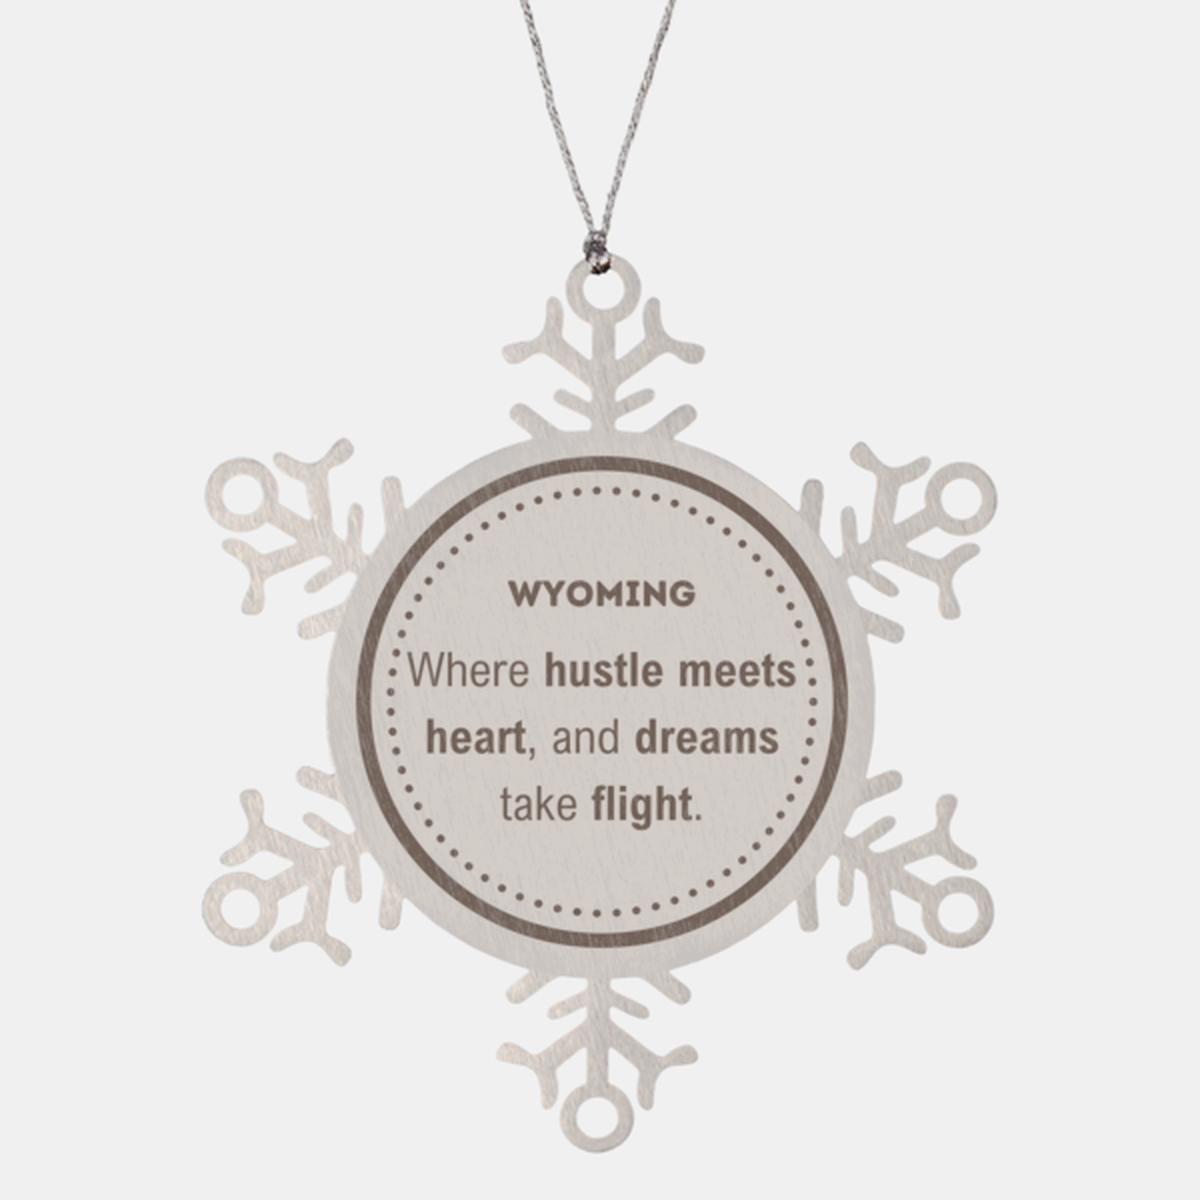 Wyoming: Where hustle meets heart, and dreams take flight, Wyoming Ornament Gifts, Proud Wyoming Christmas Wyoming Snowflake Ornament, Wyoming State People, Men, Women, Friends